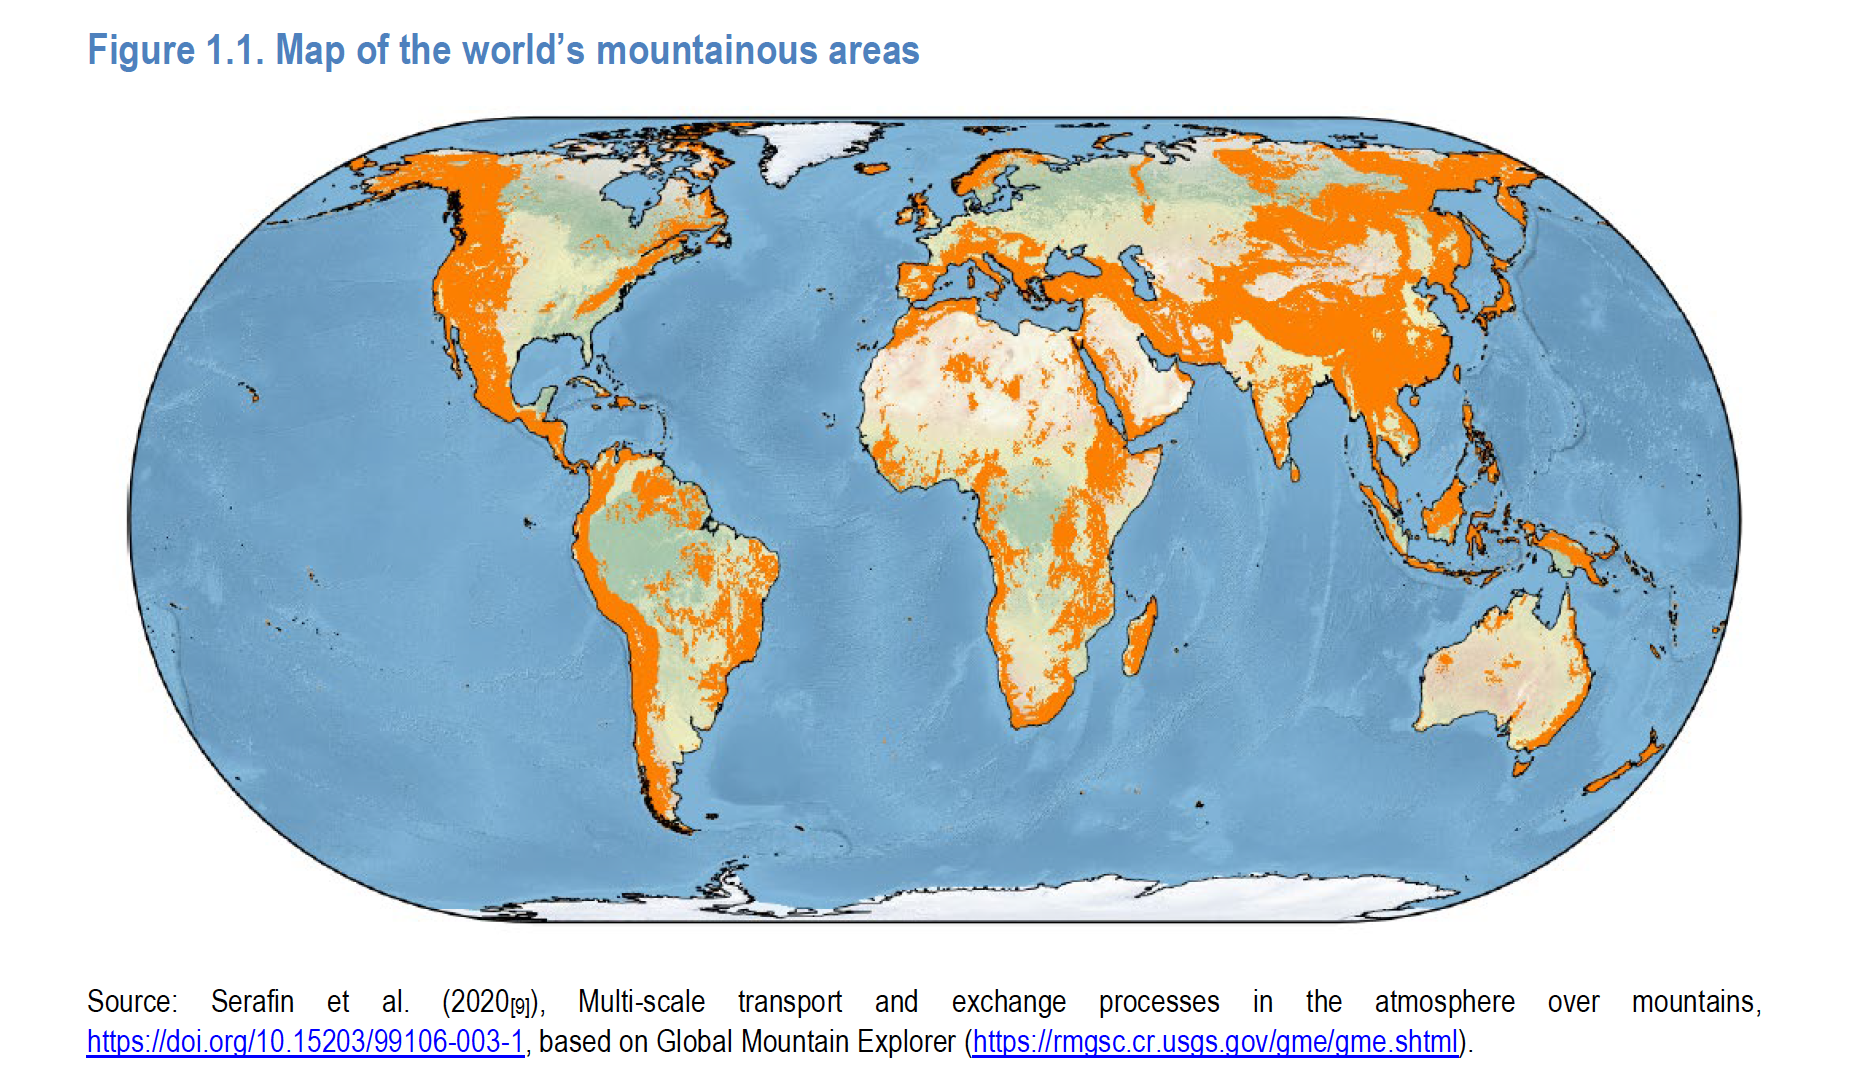 a world map with orange showing mountainous regions